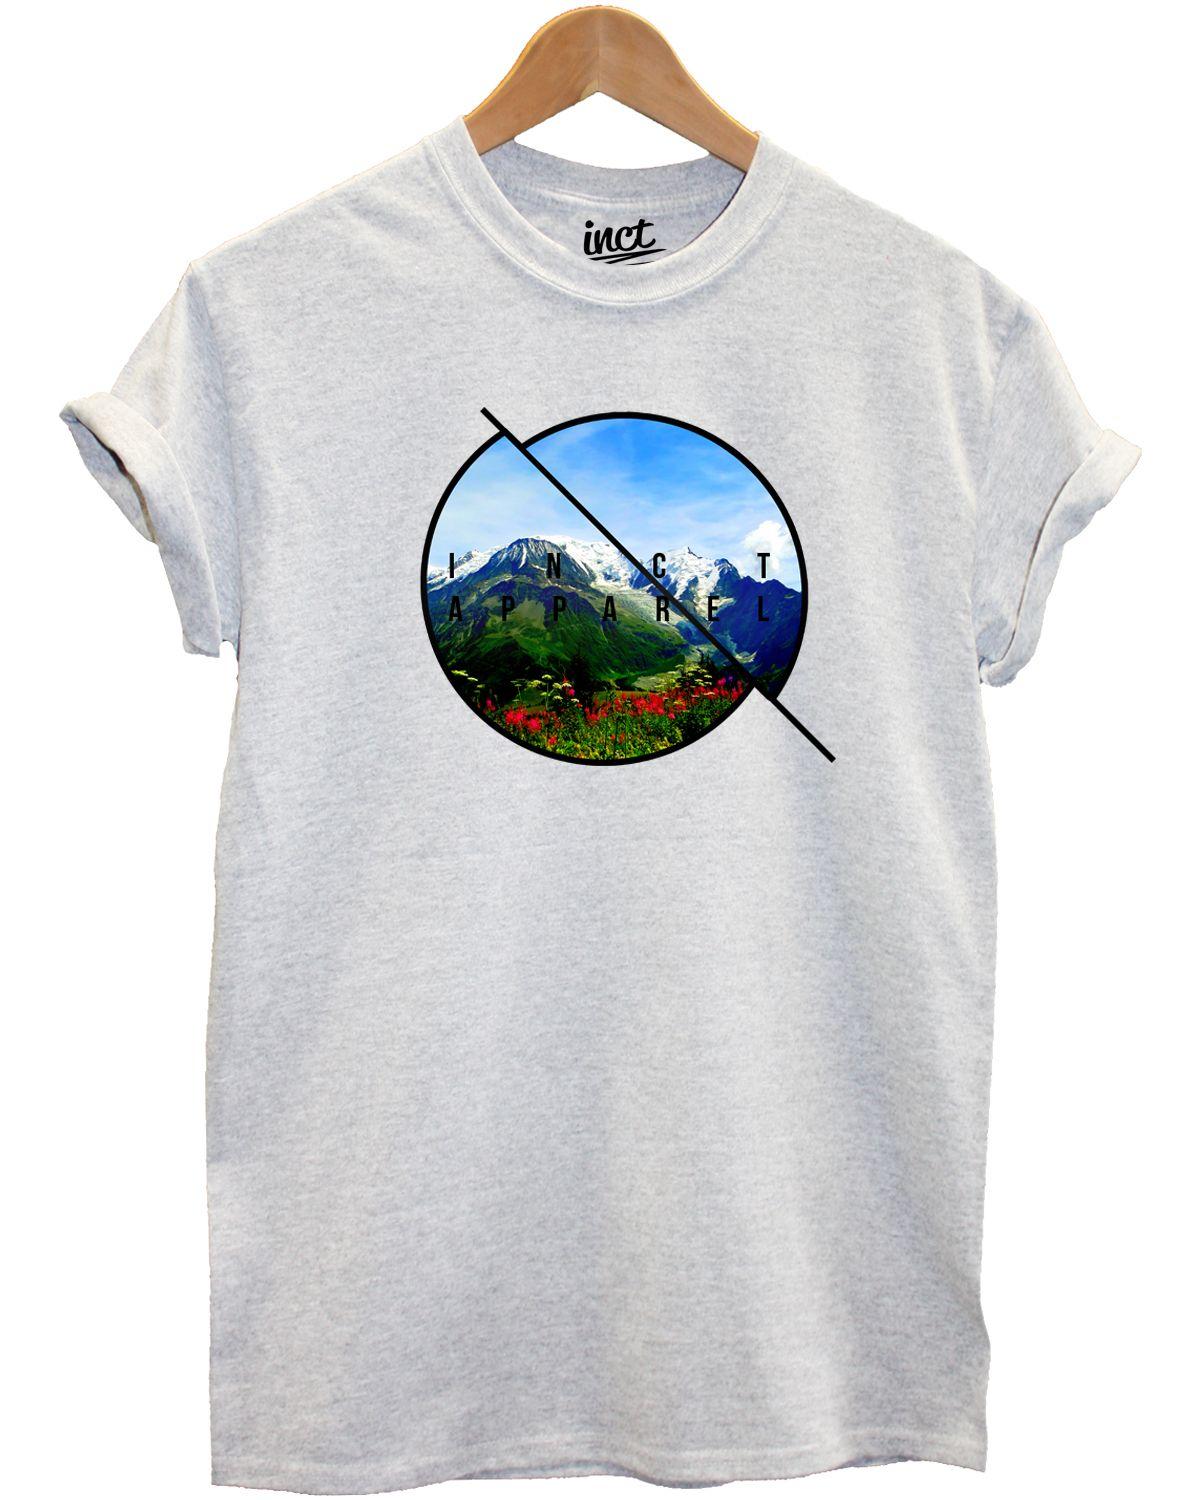 With a Half Circle Mountain Logo - sunshine Archives - Inct Apparel